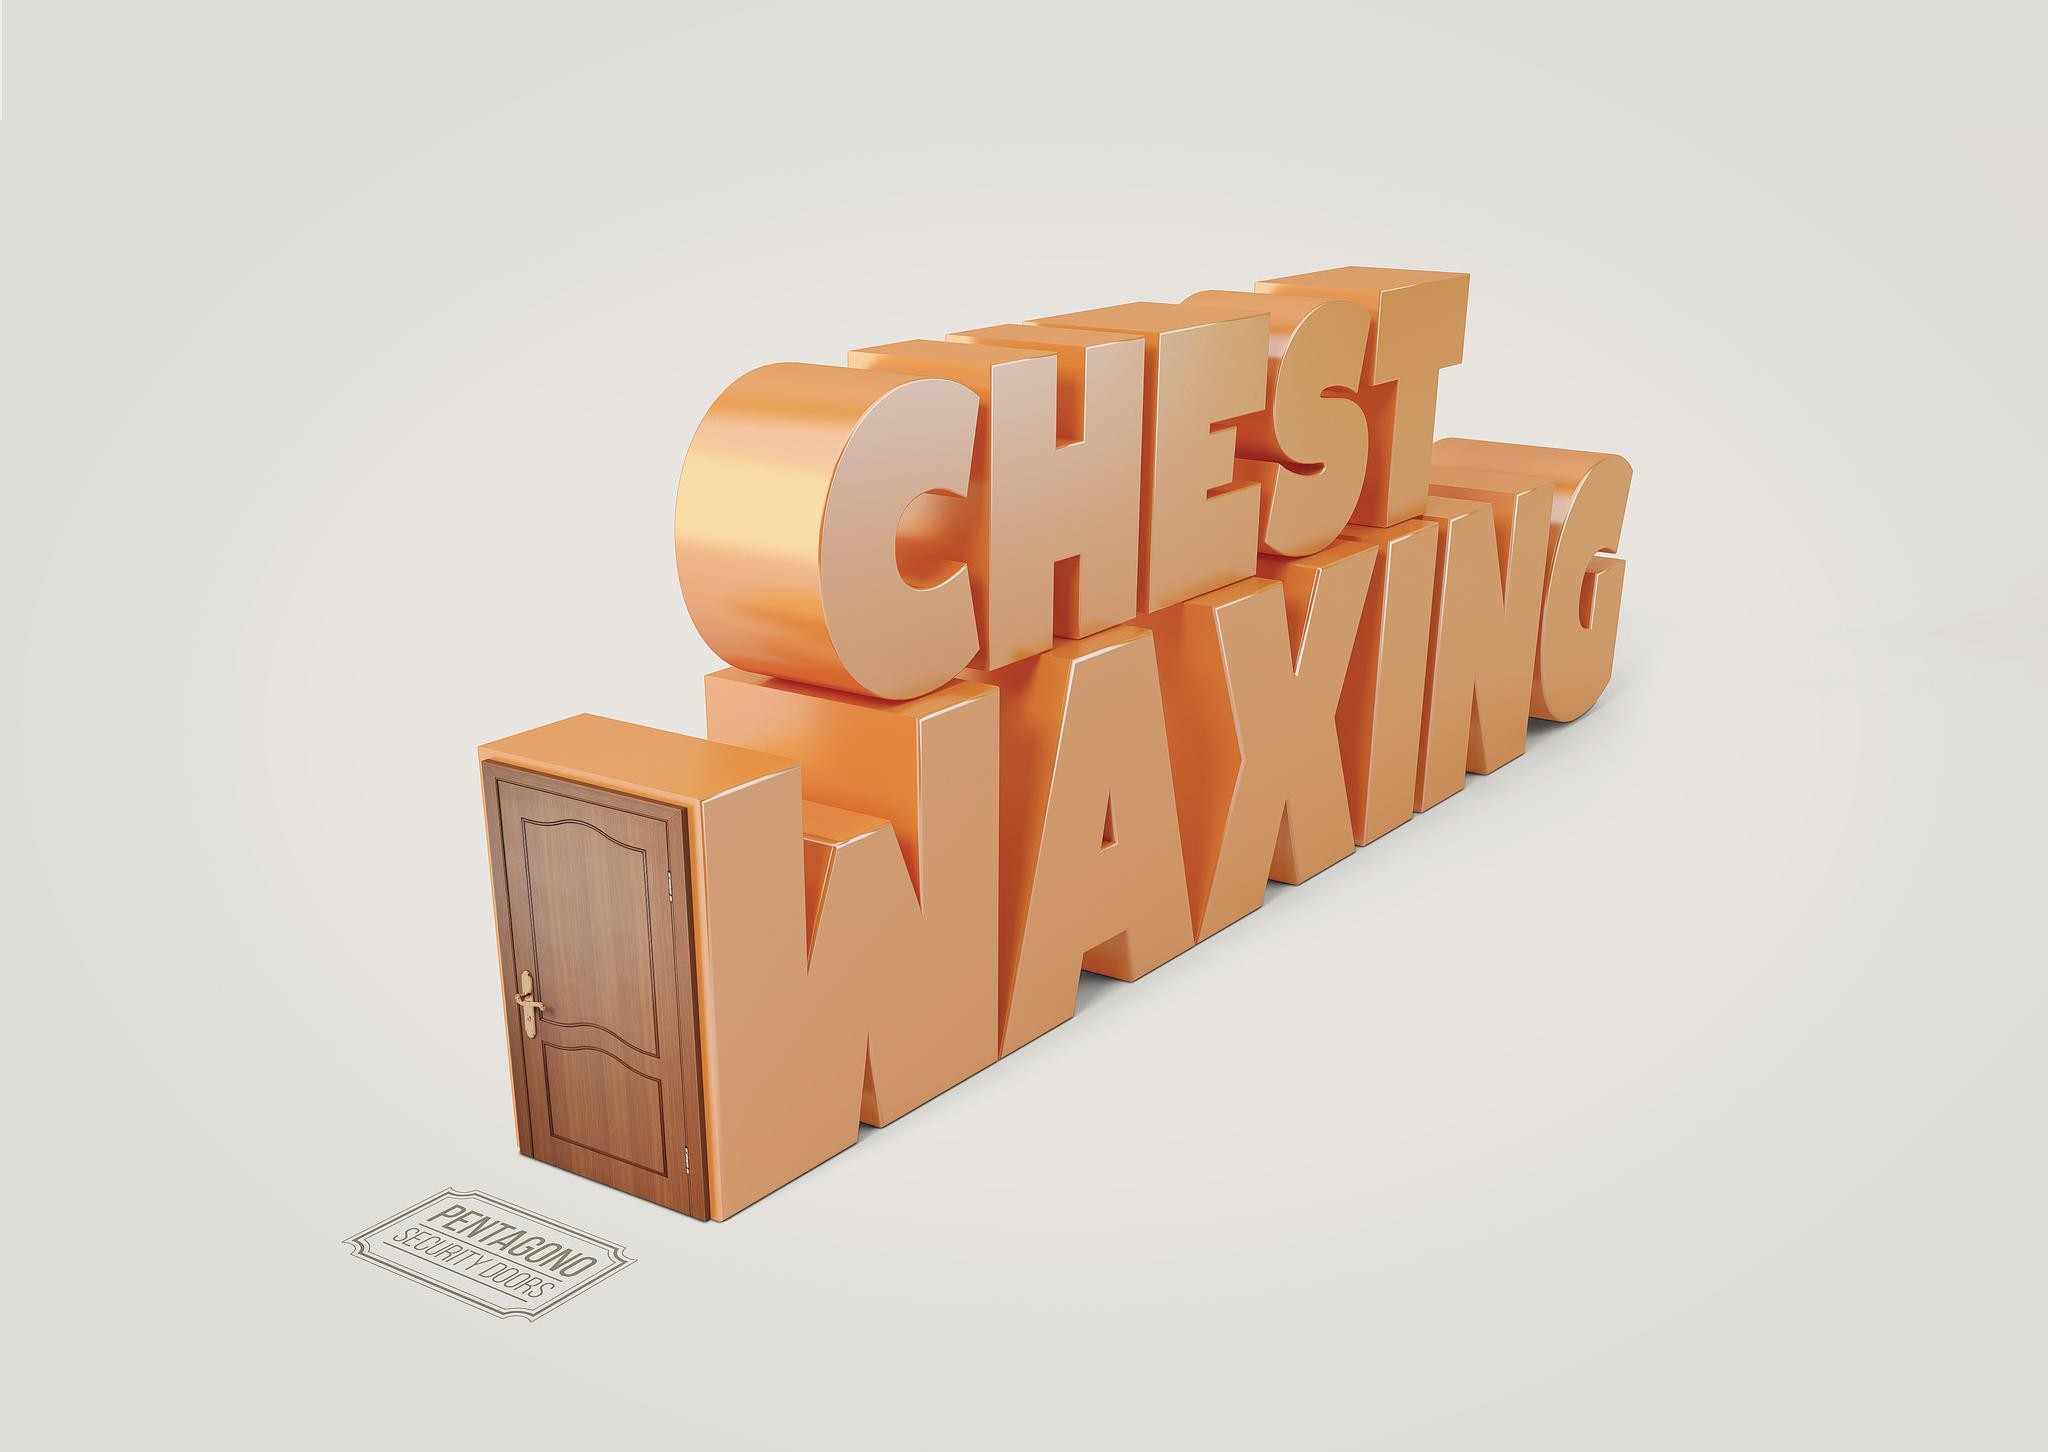 CHEST WAXING